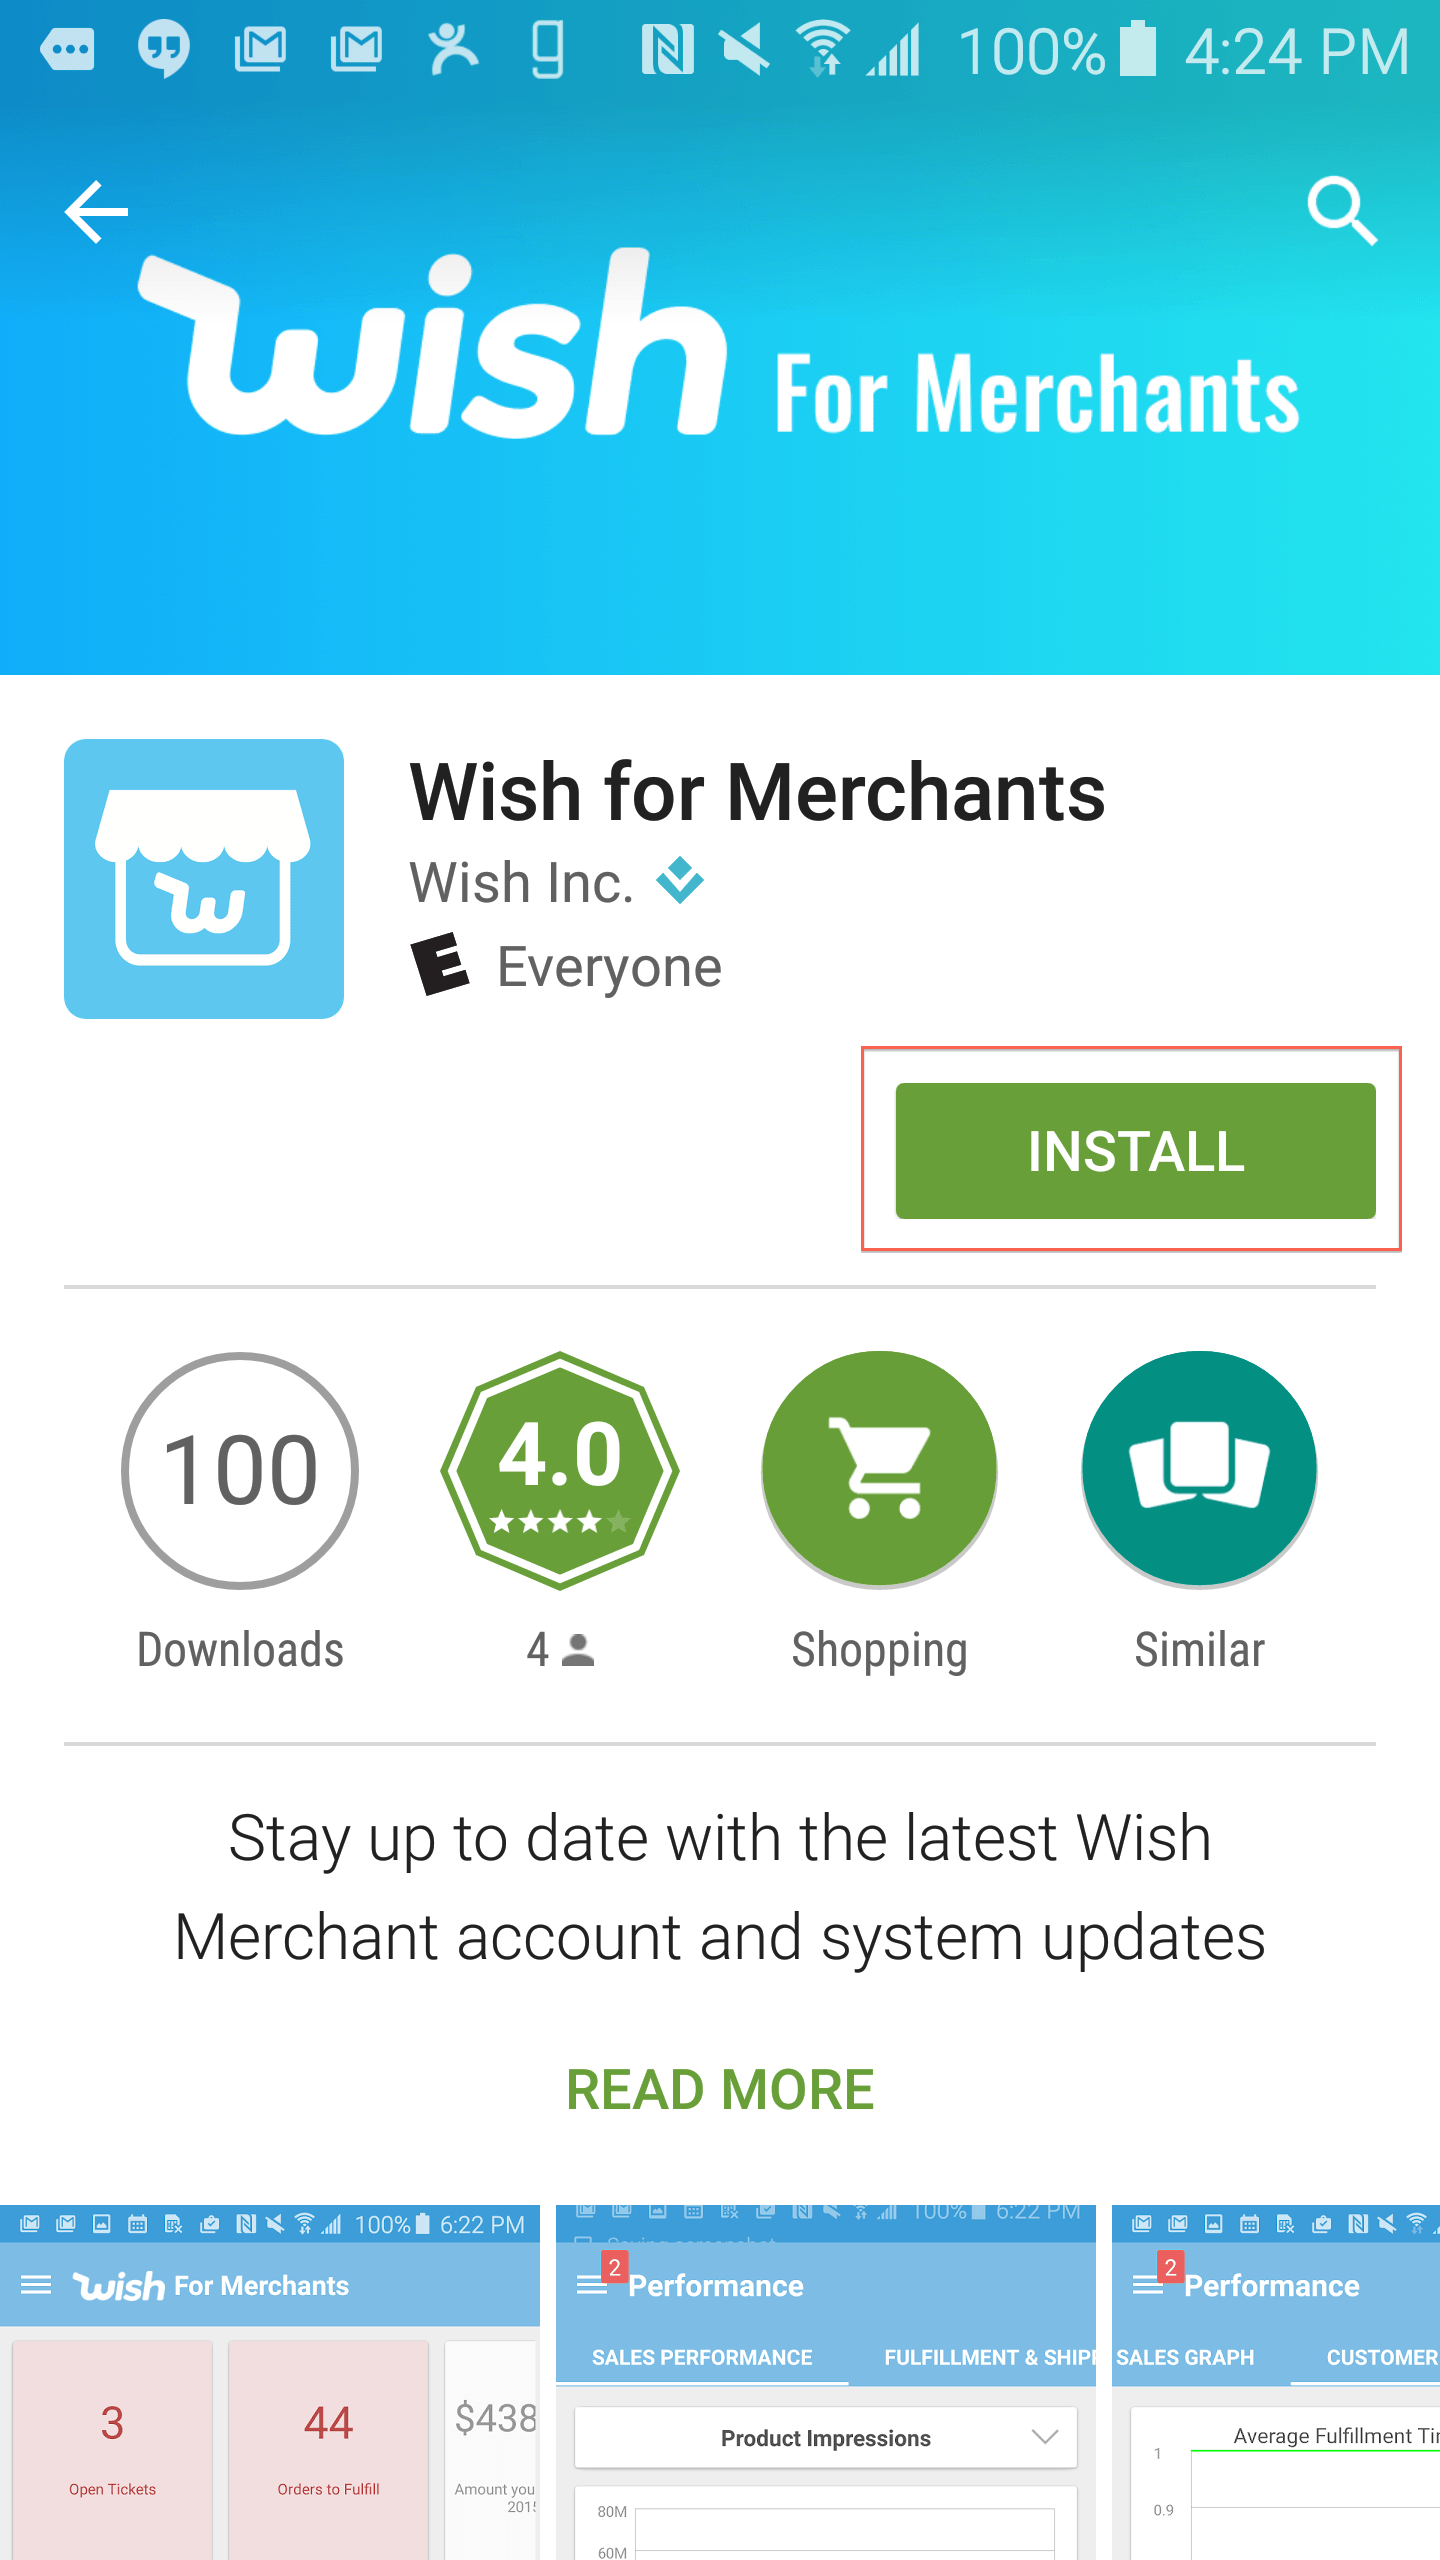 Wish.com Logo - How to Download and Install the Merchant App